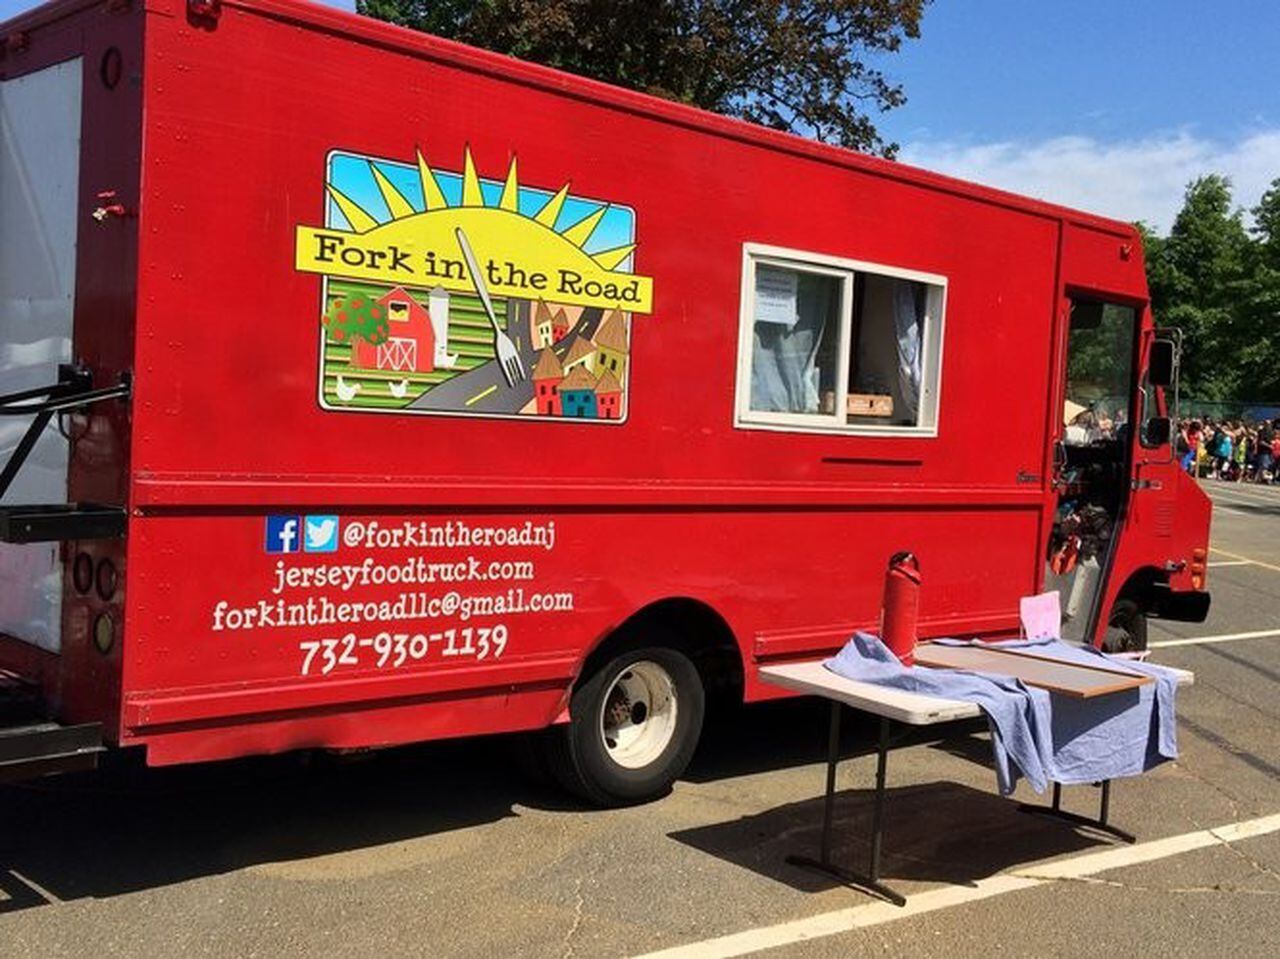 A Culinary Crisis: The Rise and Fall of America's Largest Food Truck Manufacturer